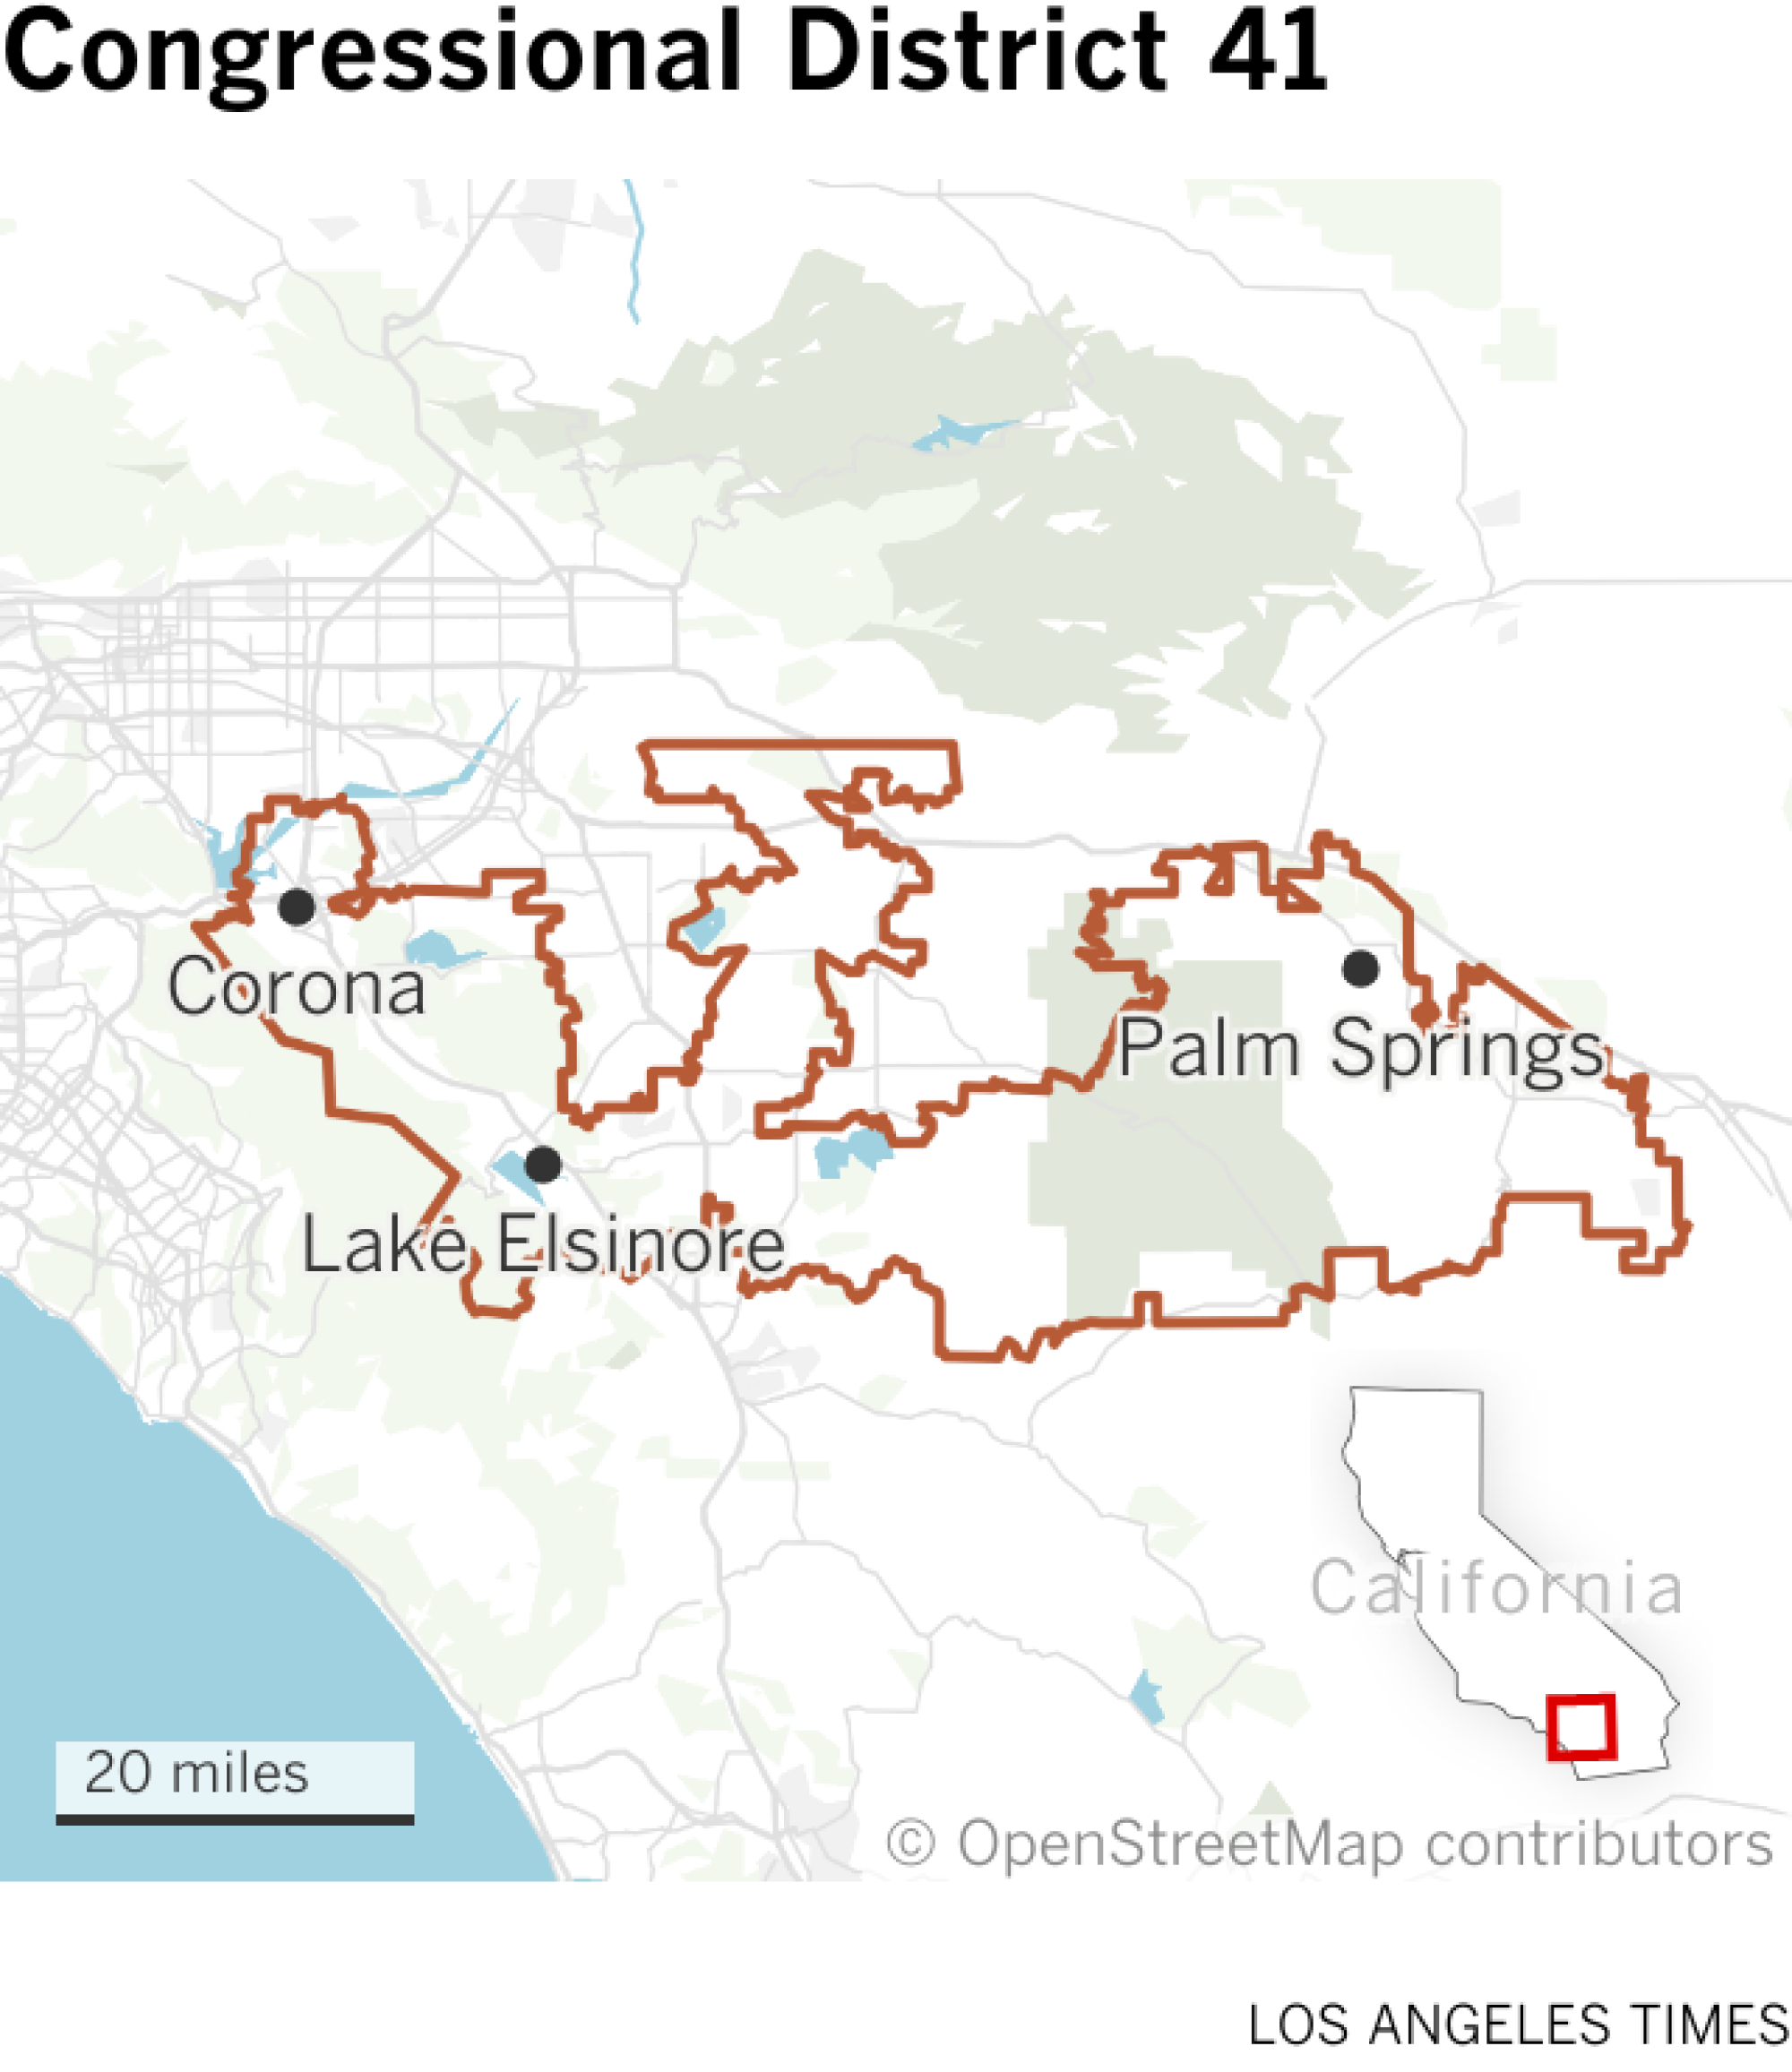 Map shows outline of California's Congressional District 41, which includes cities such as Corona, Lake Elsinore and Palm Springs.